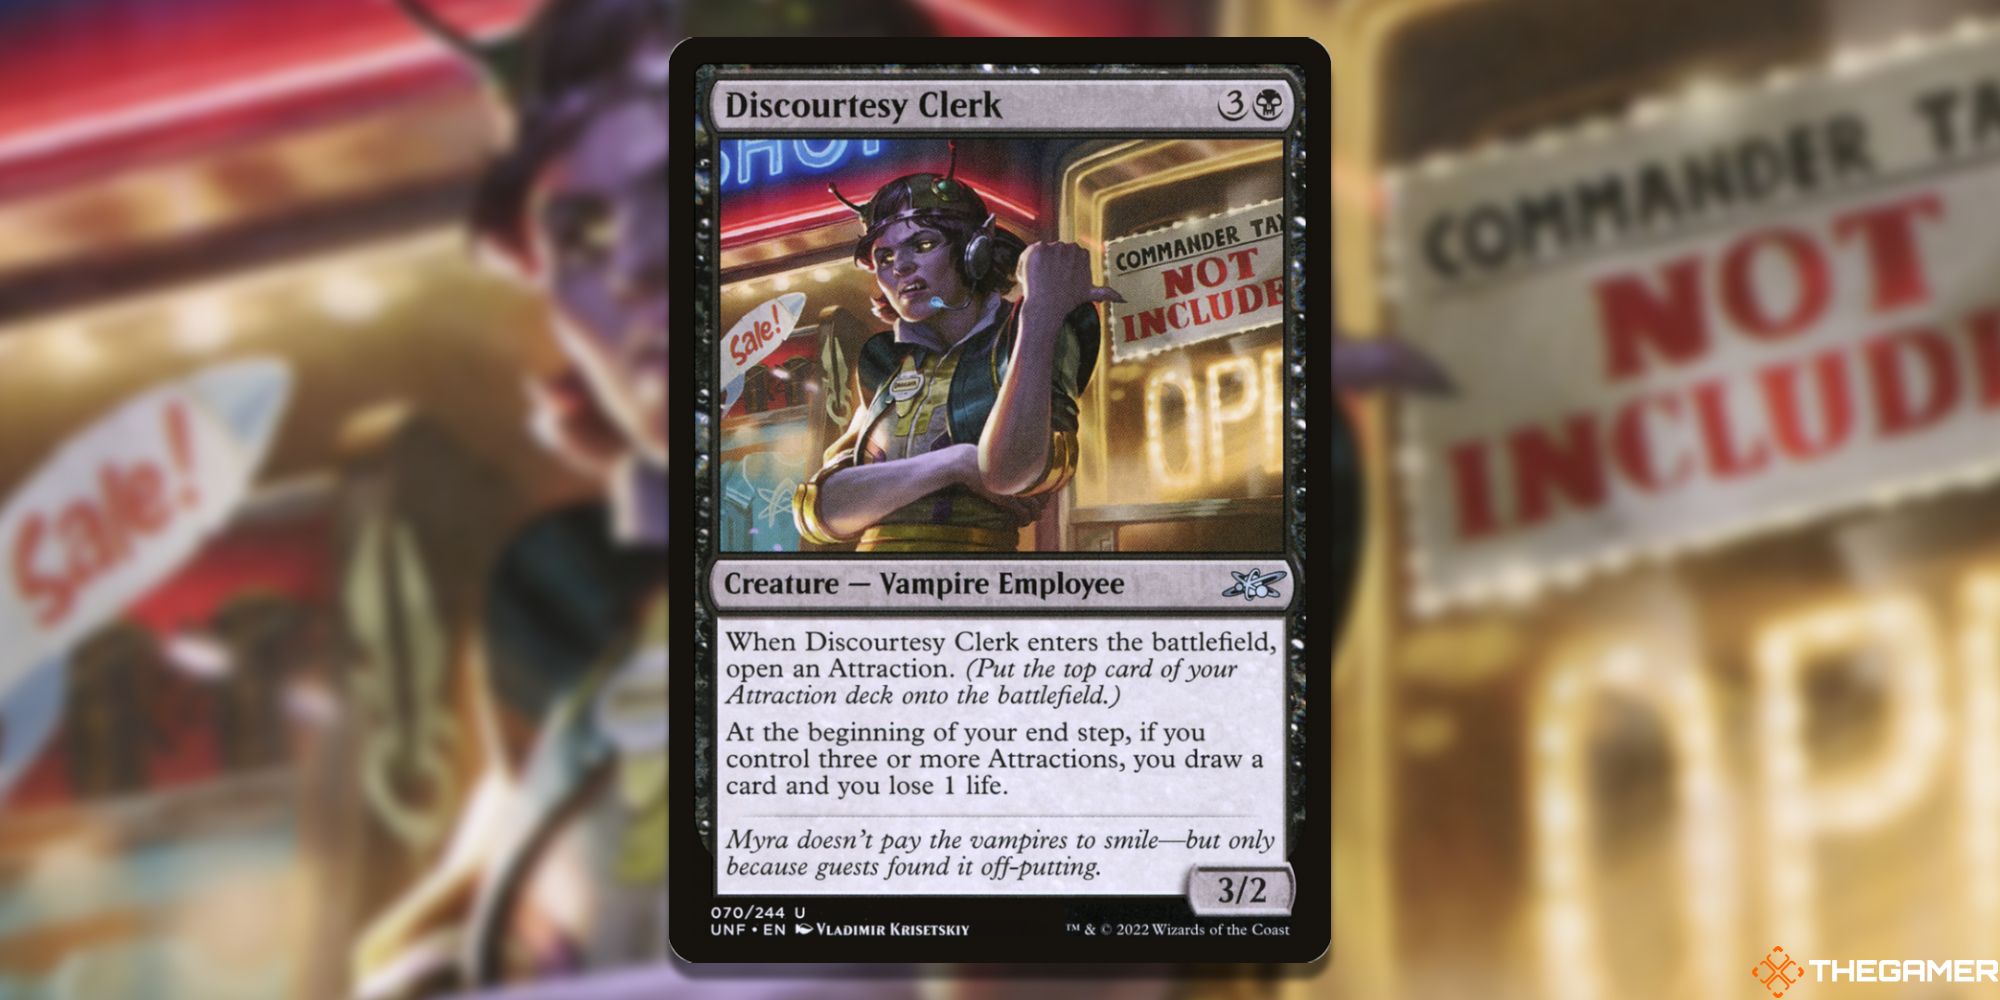 Image of the Discourtesy Clerk card in Magic: The Gathering, with art by Vladimir Krisetskiy